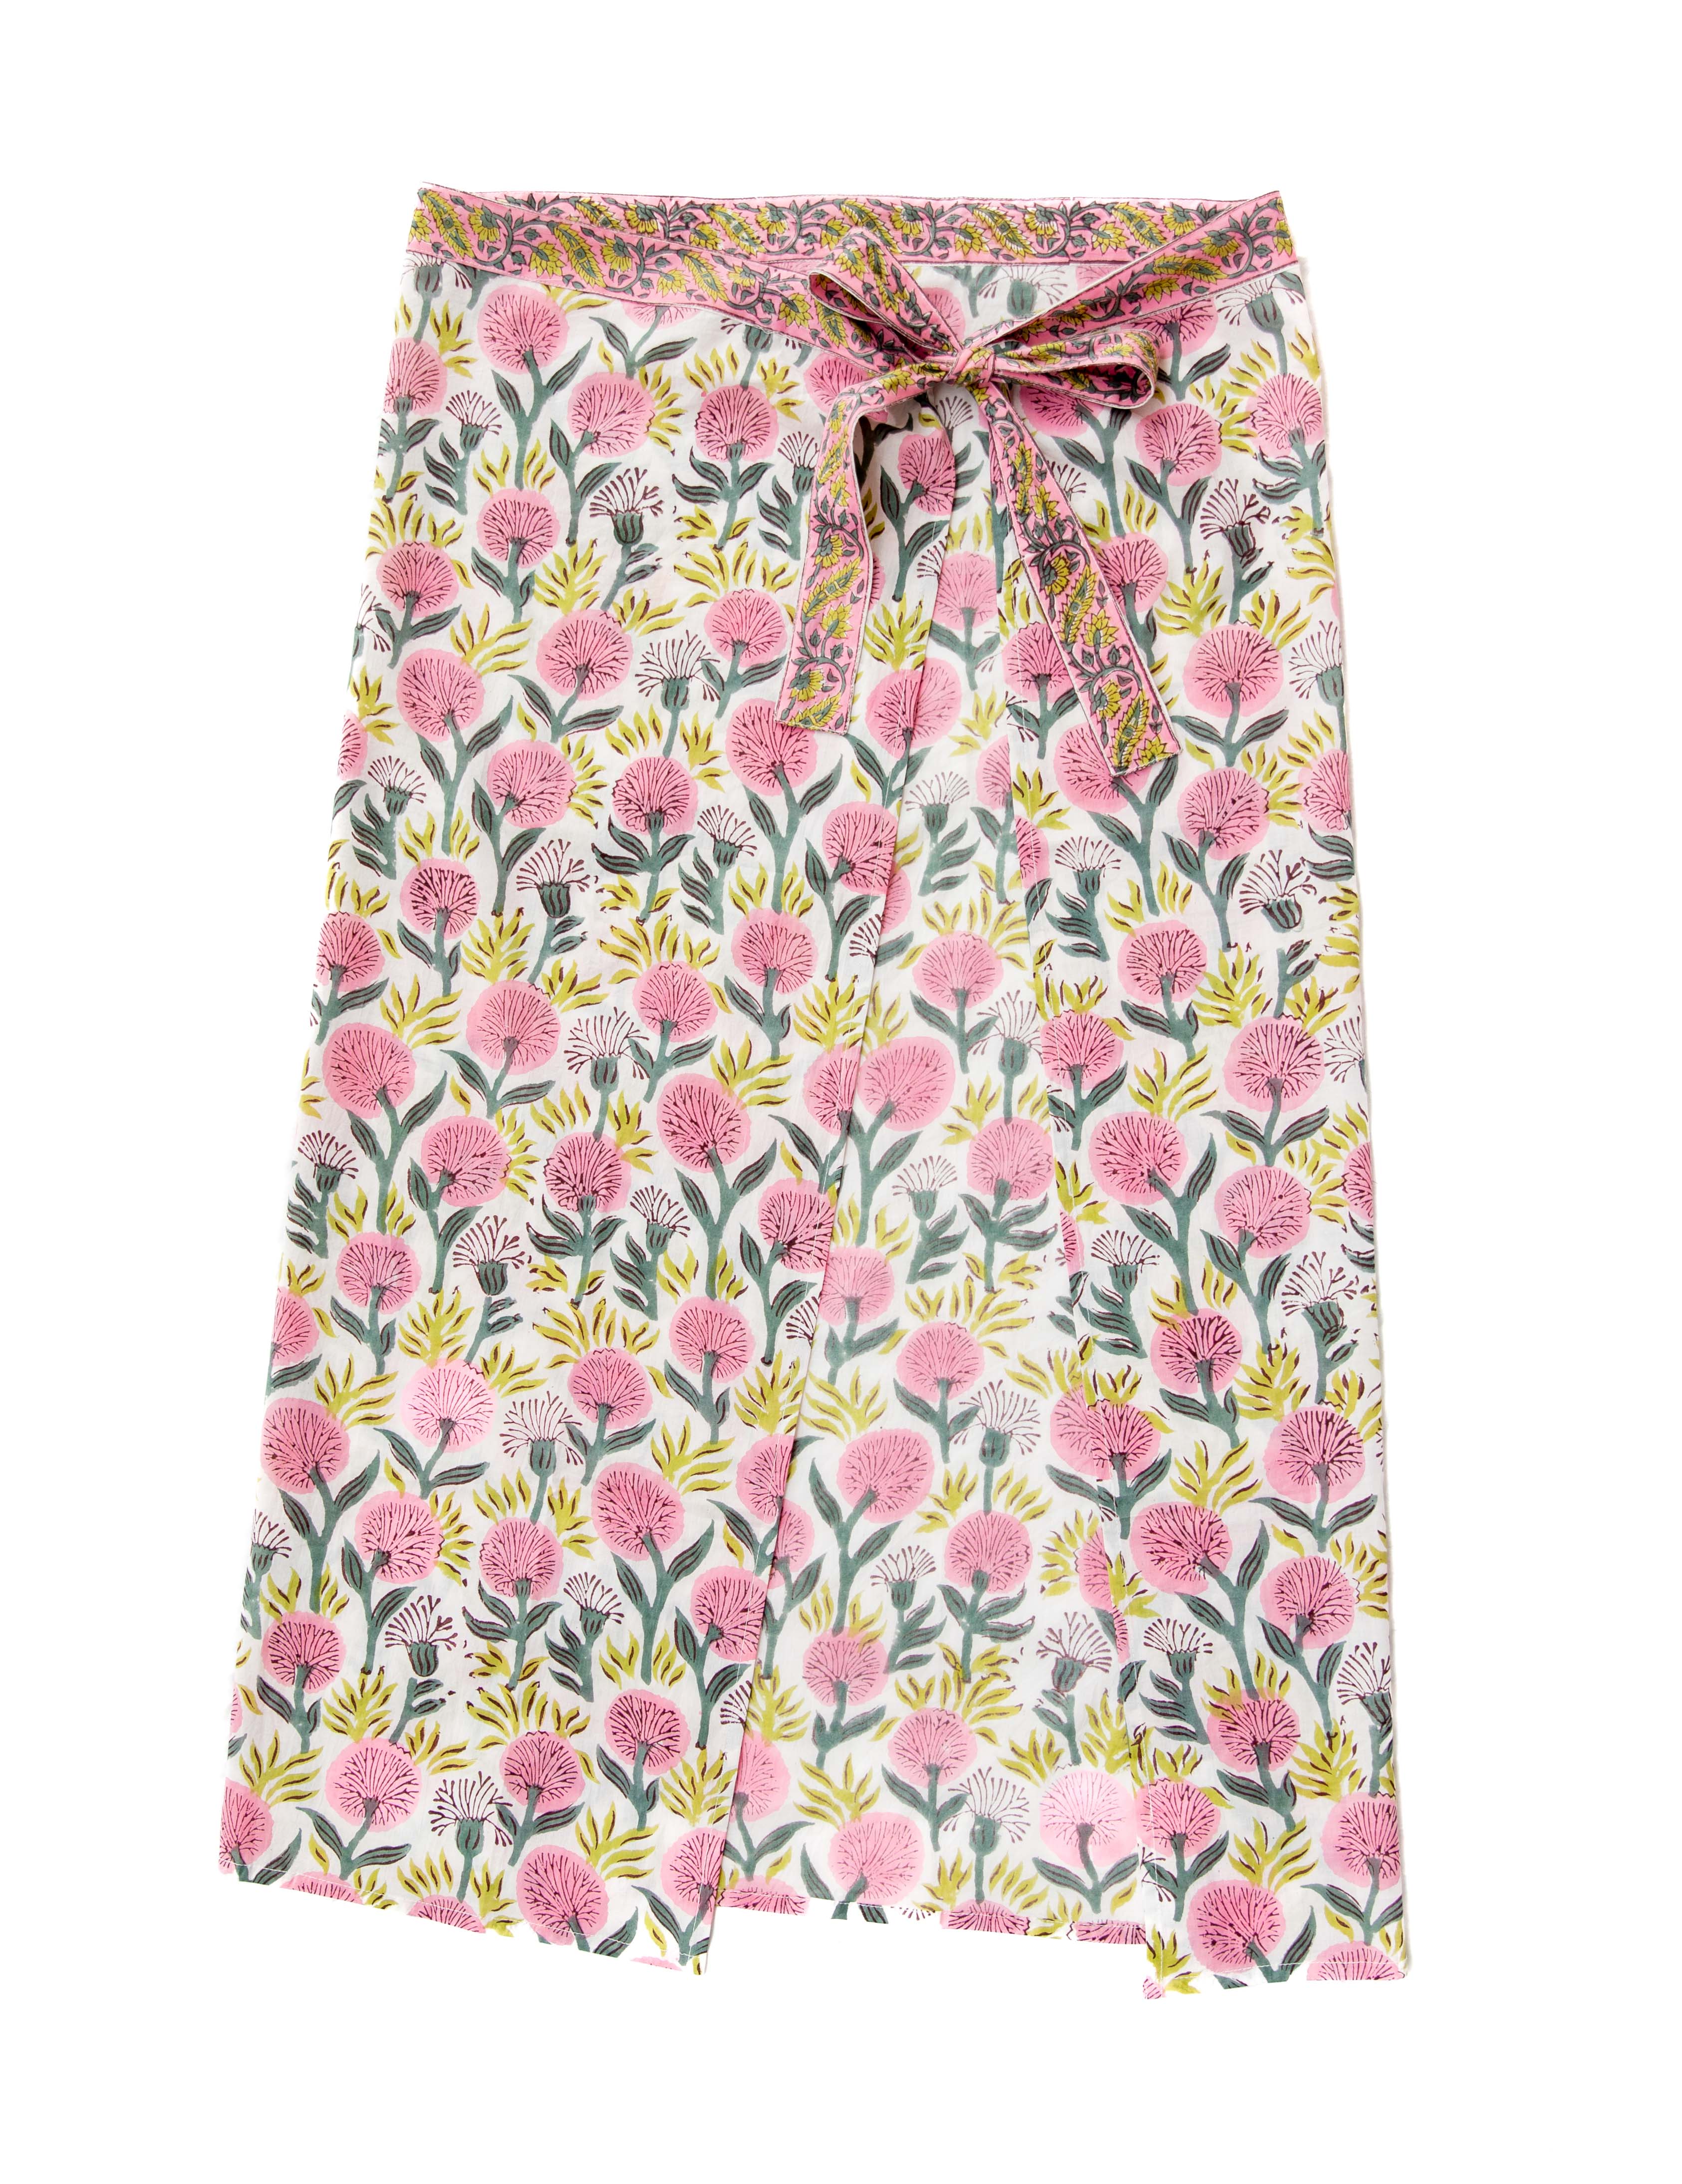 THE PINK POPPY SARONG - LONG